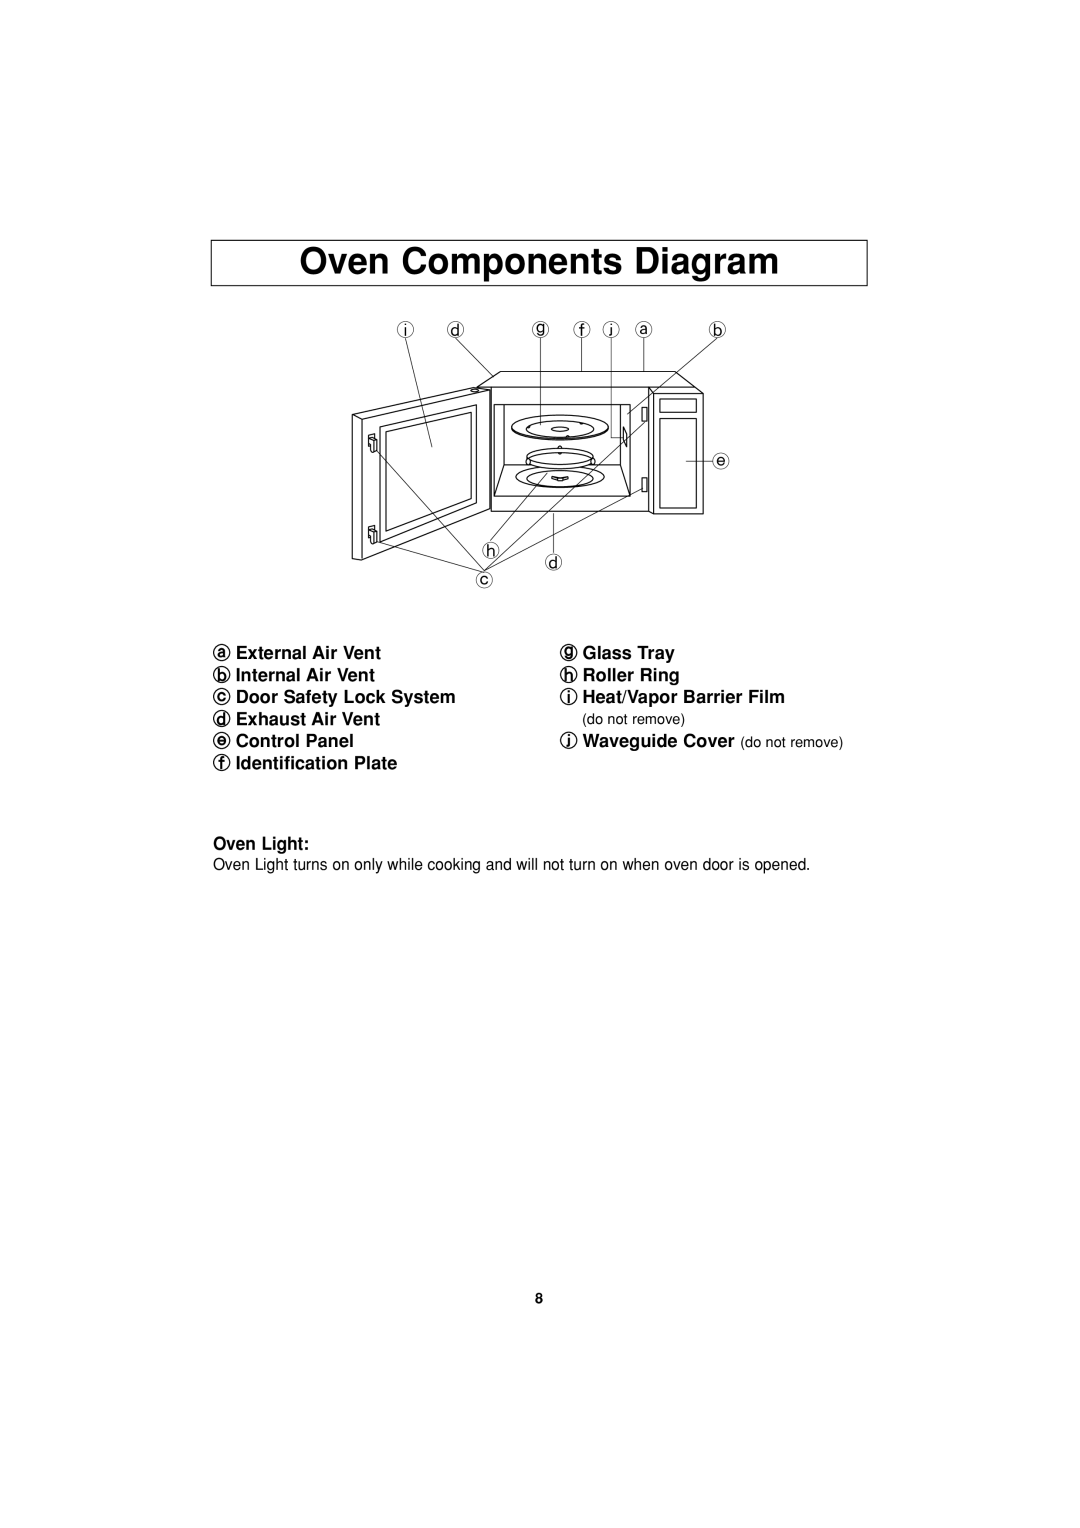 Panasonic NN-S334 important safety instructions Oven Components Diagram 